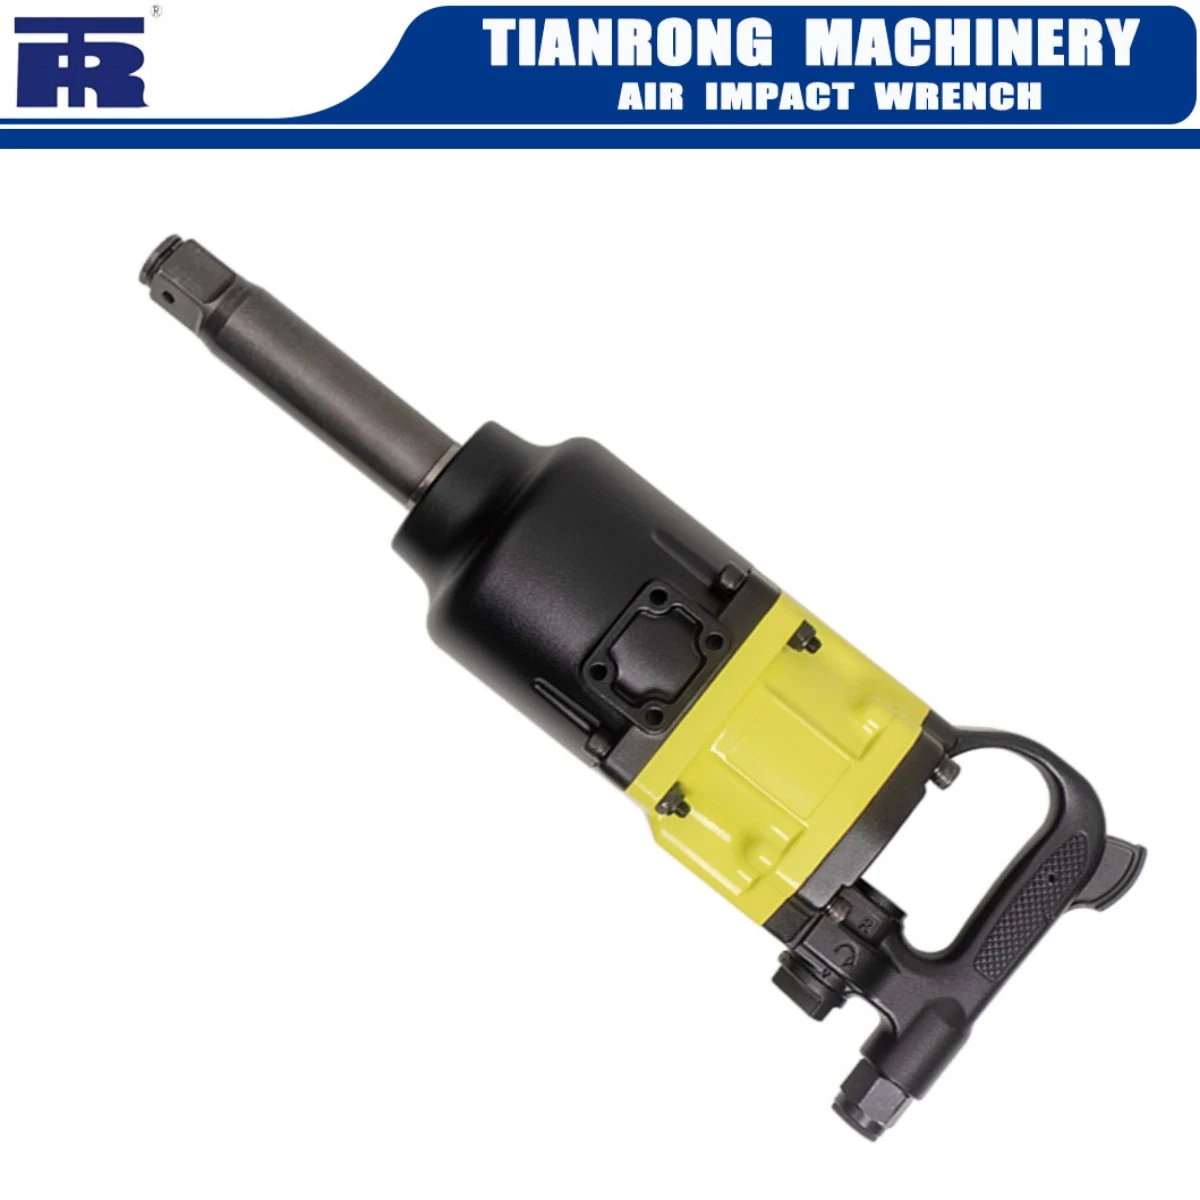 Industrial Impact Wrench, Pneumatic Tool, with 1 Inch Square Drive, Pinless Hammer Structure, High Levels of Torque Output, Handle Larger Bolts and Nuts